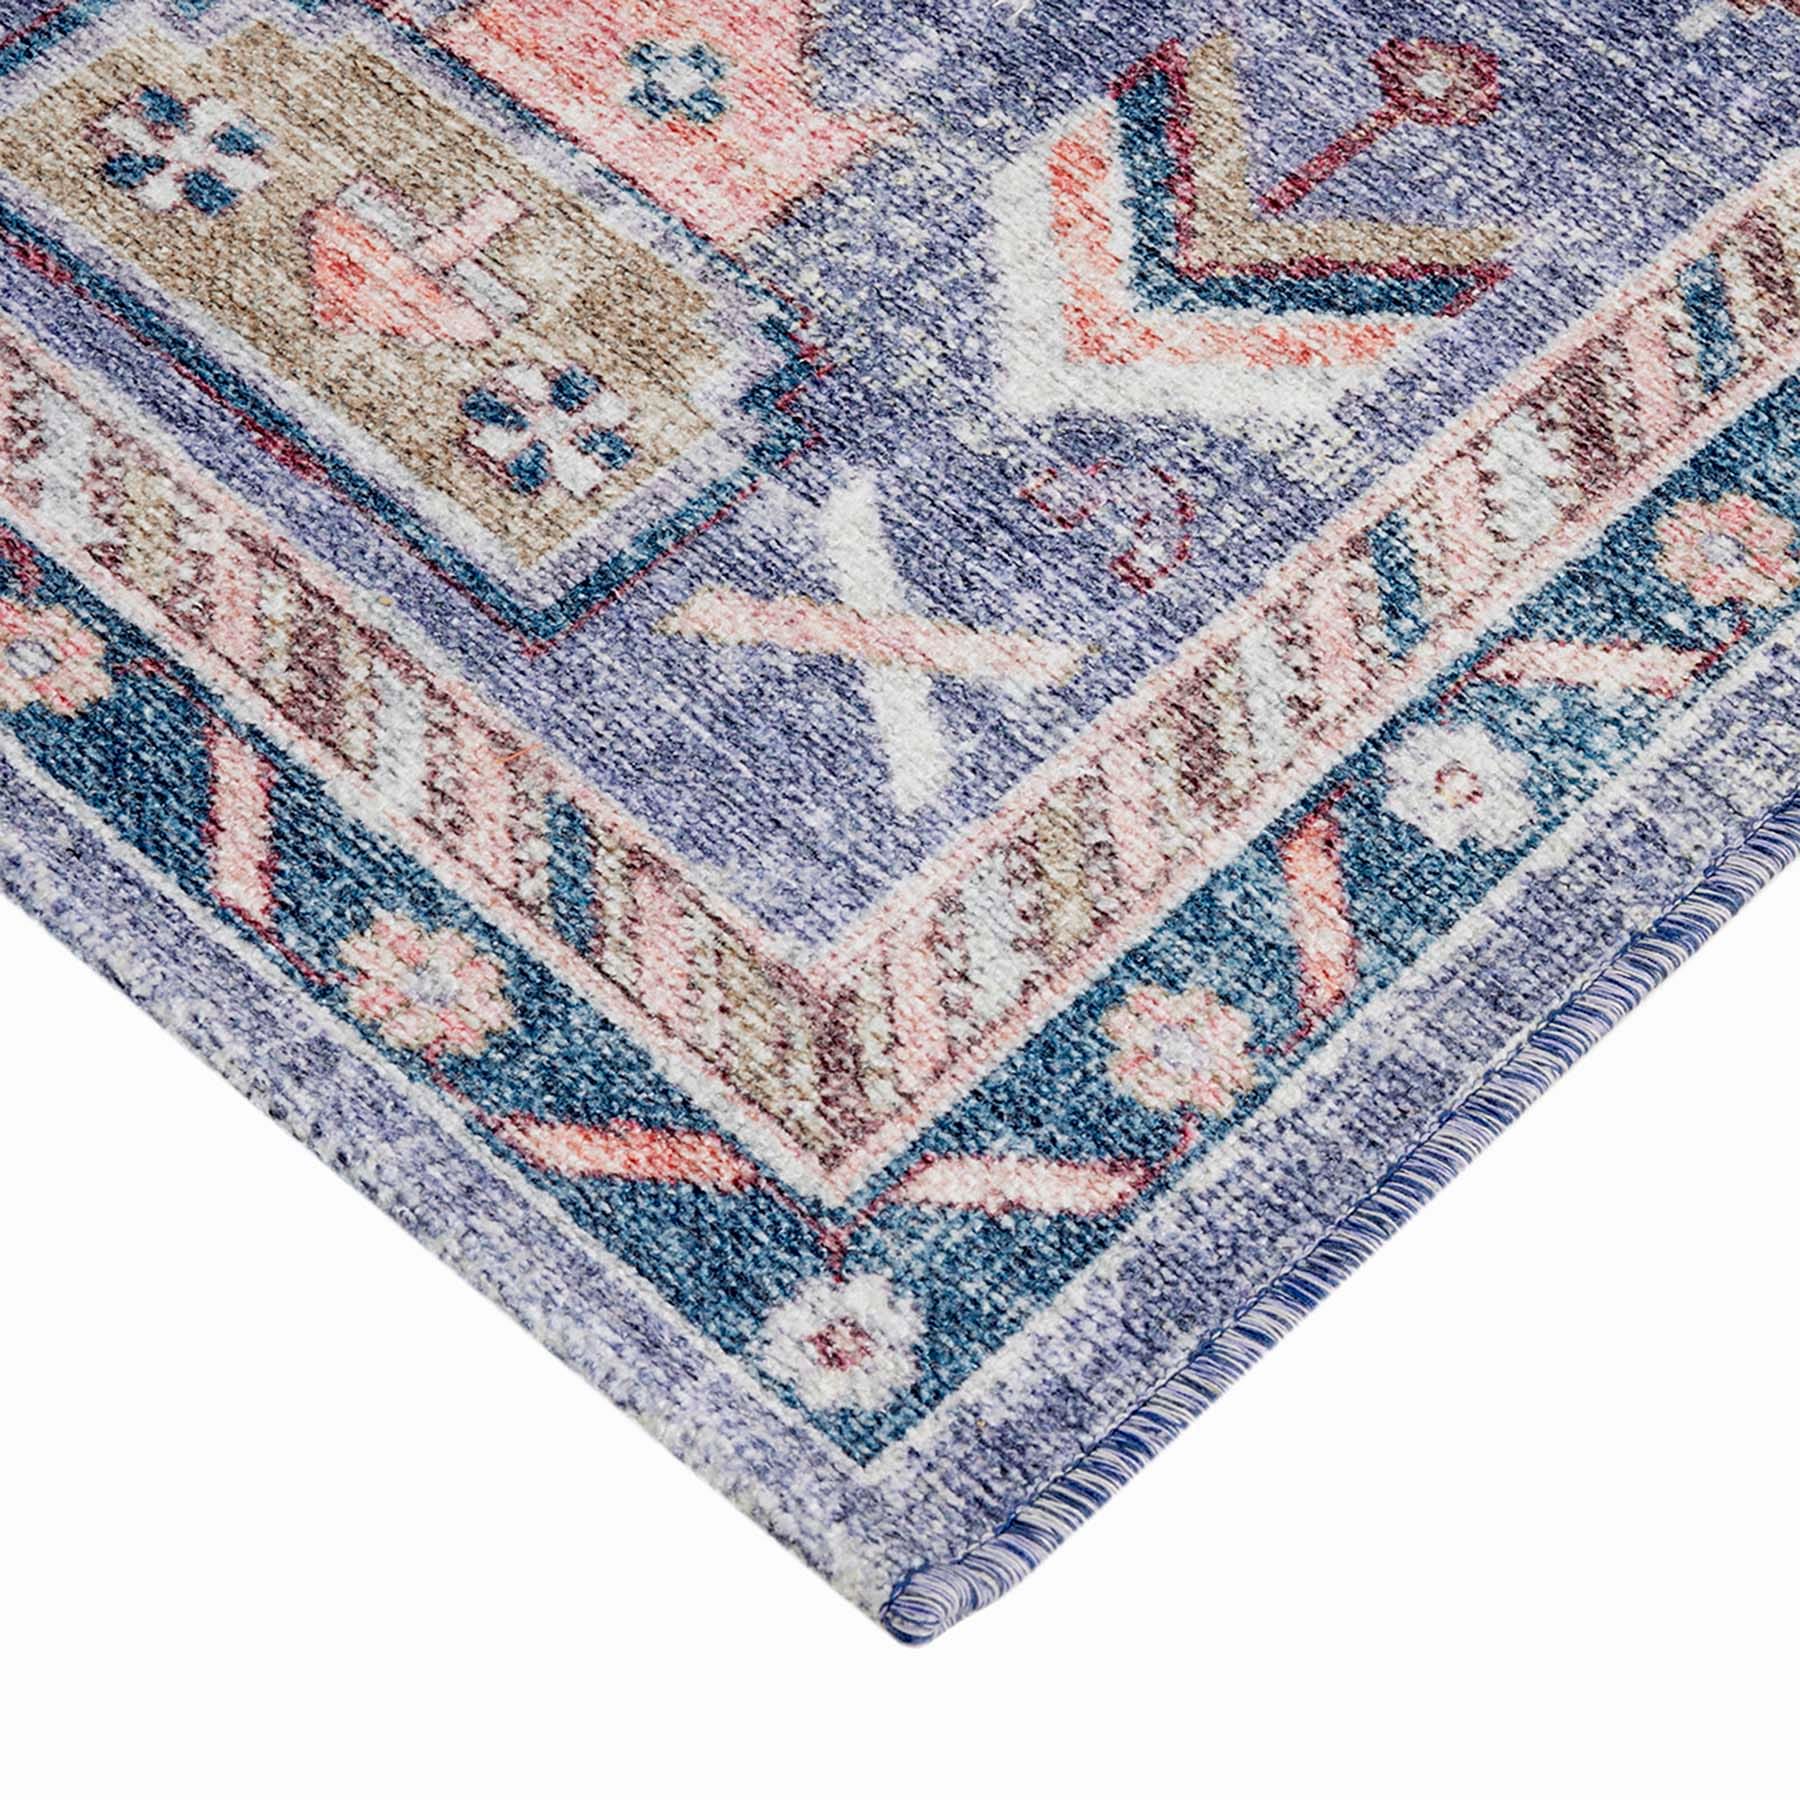 (B828) Blue Floral Medallion Washable Area Rug, 5x7 - nybusiness